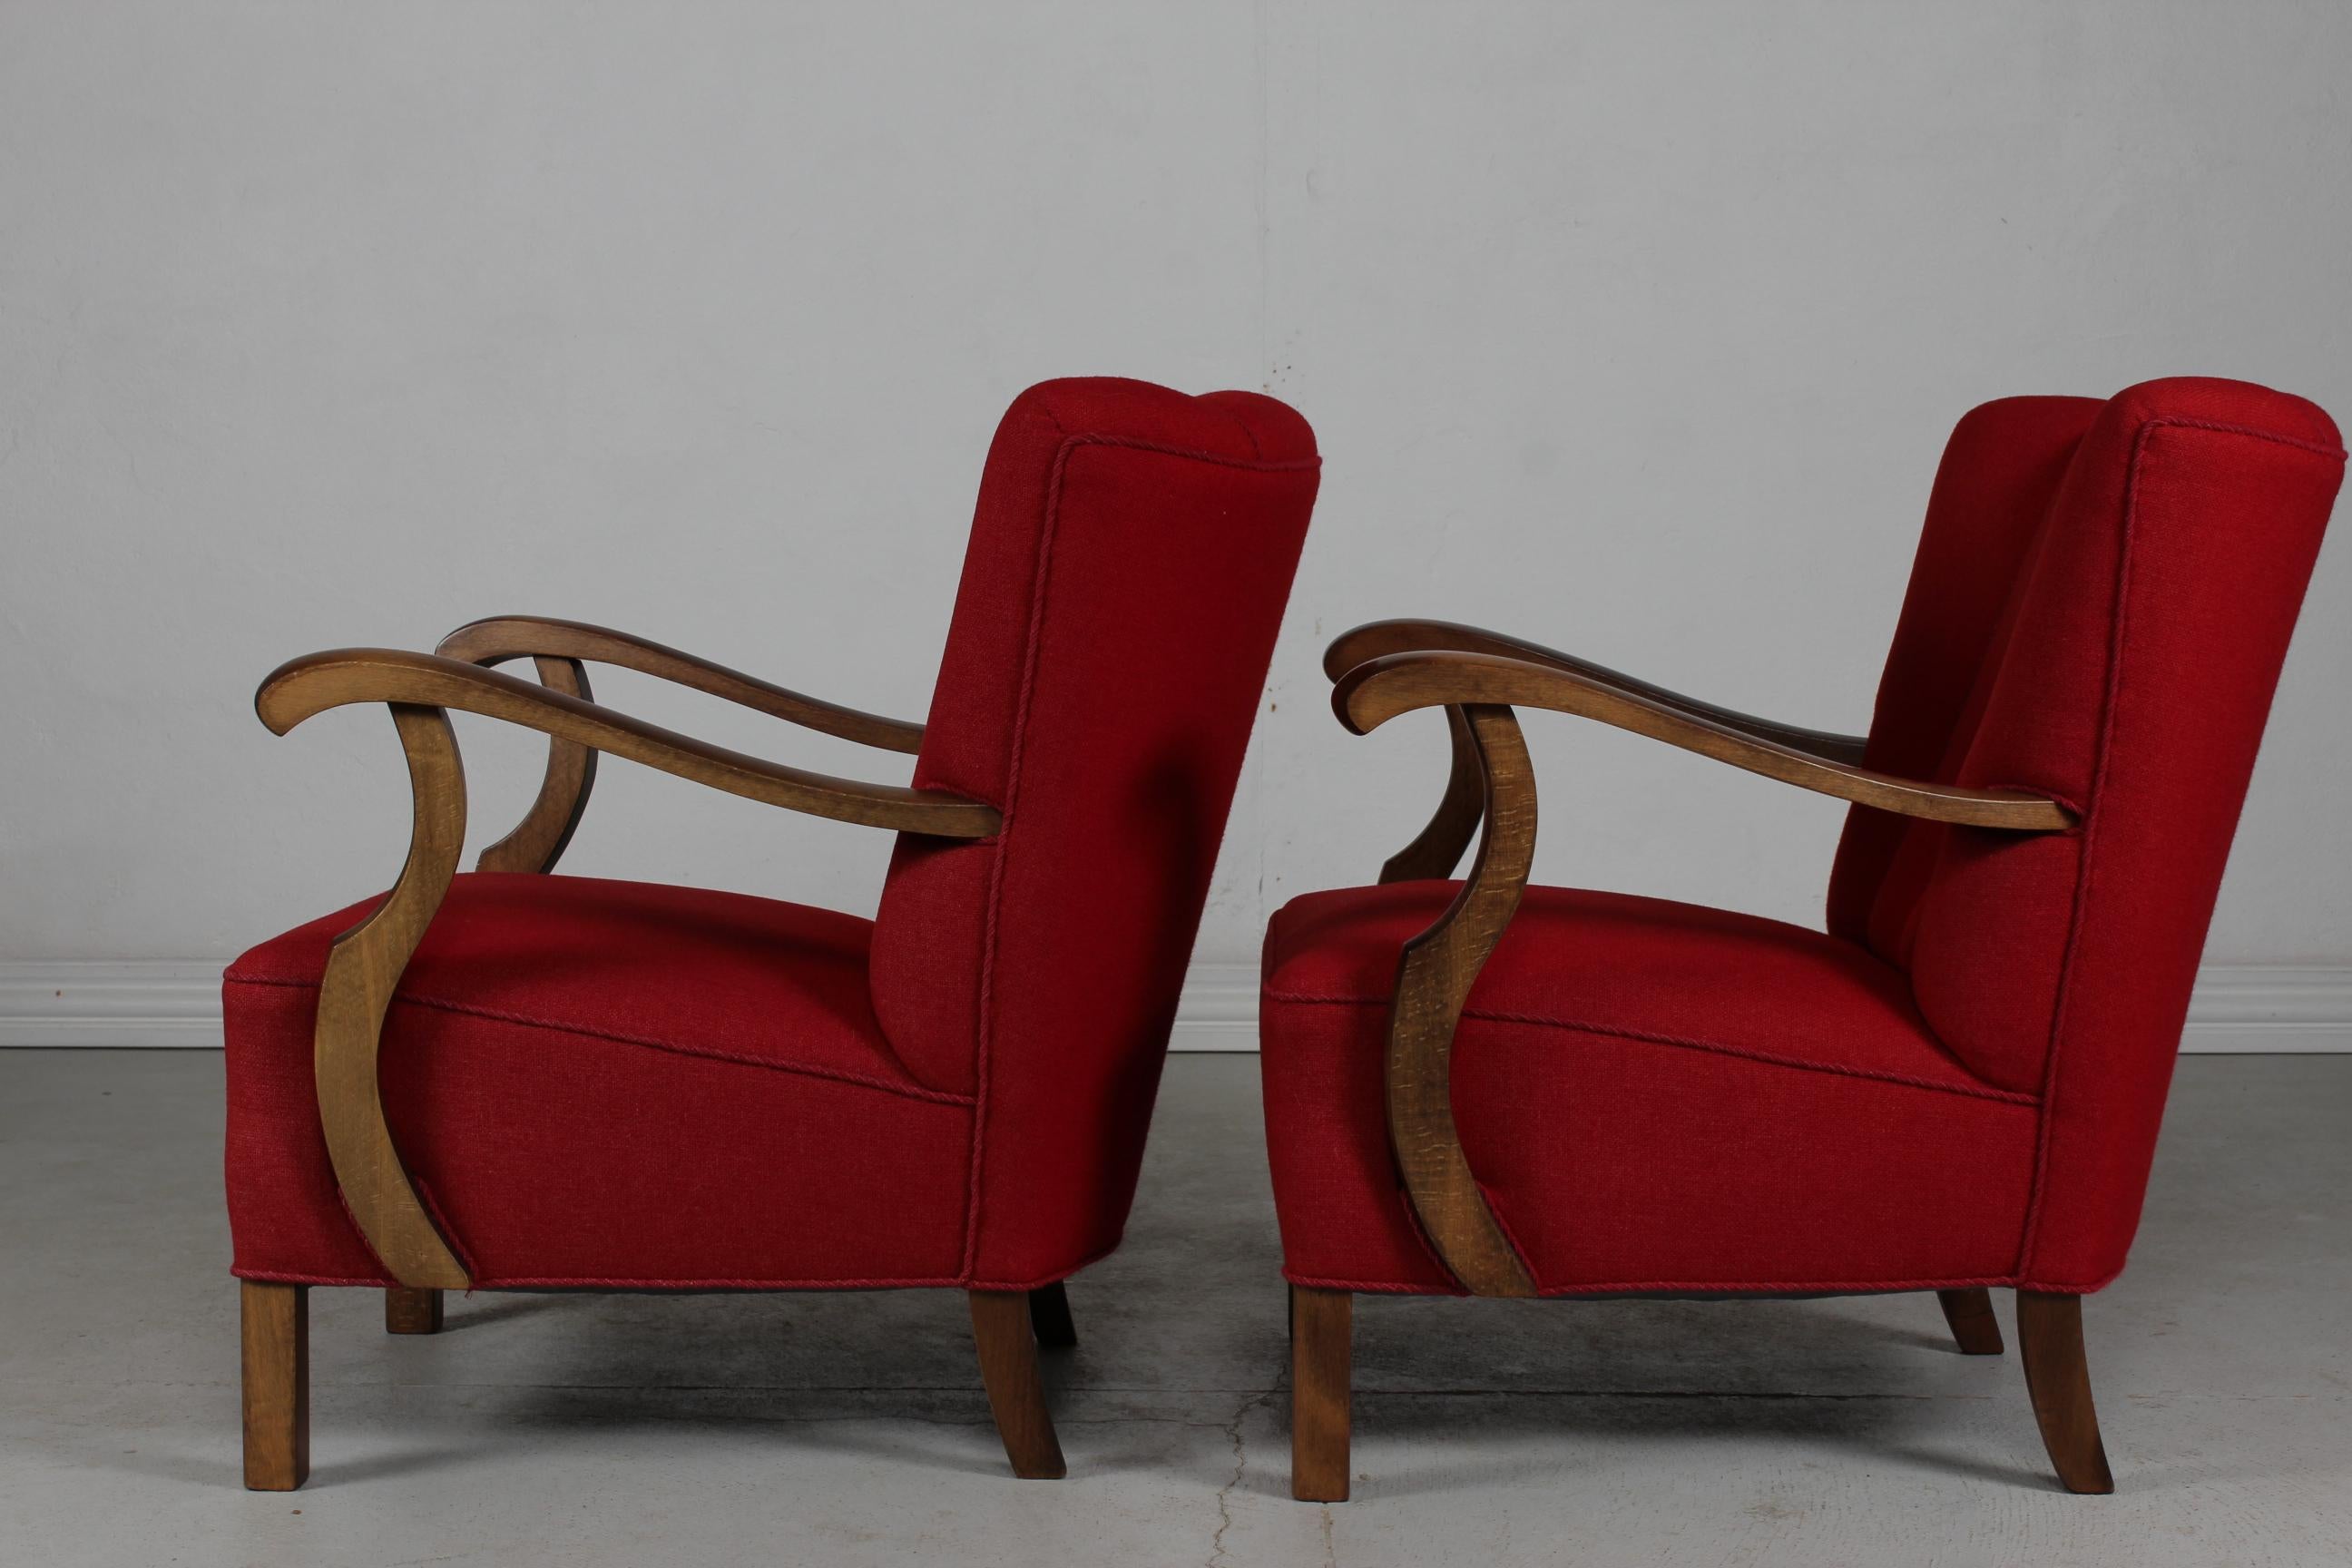 Pair of Art Deco Easy Chairs in Viggo Boesen Style with Red Wool, Denmark 1930's For Sale 4